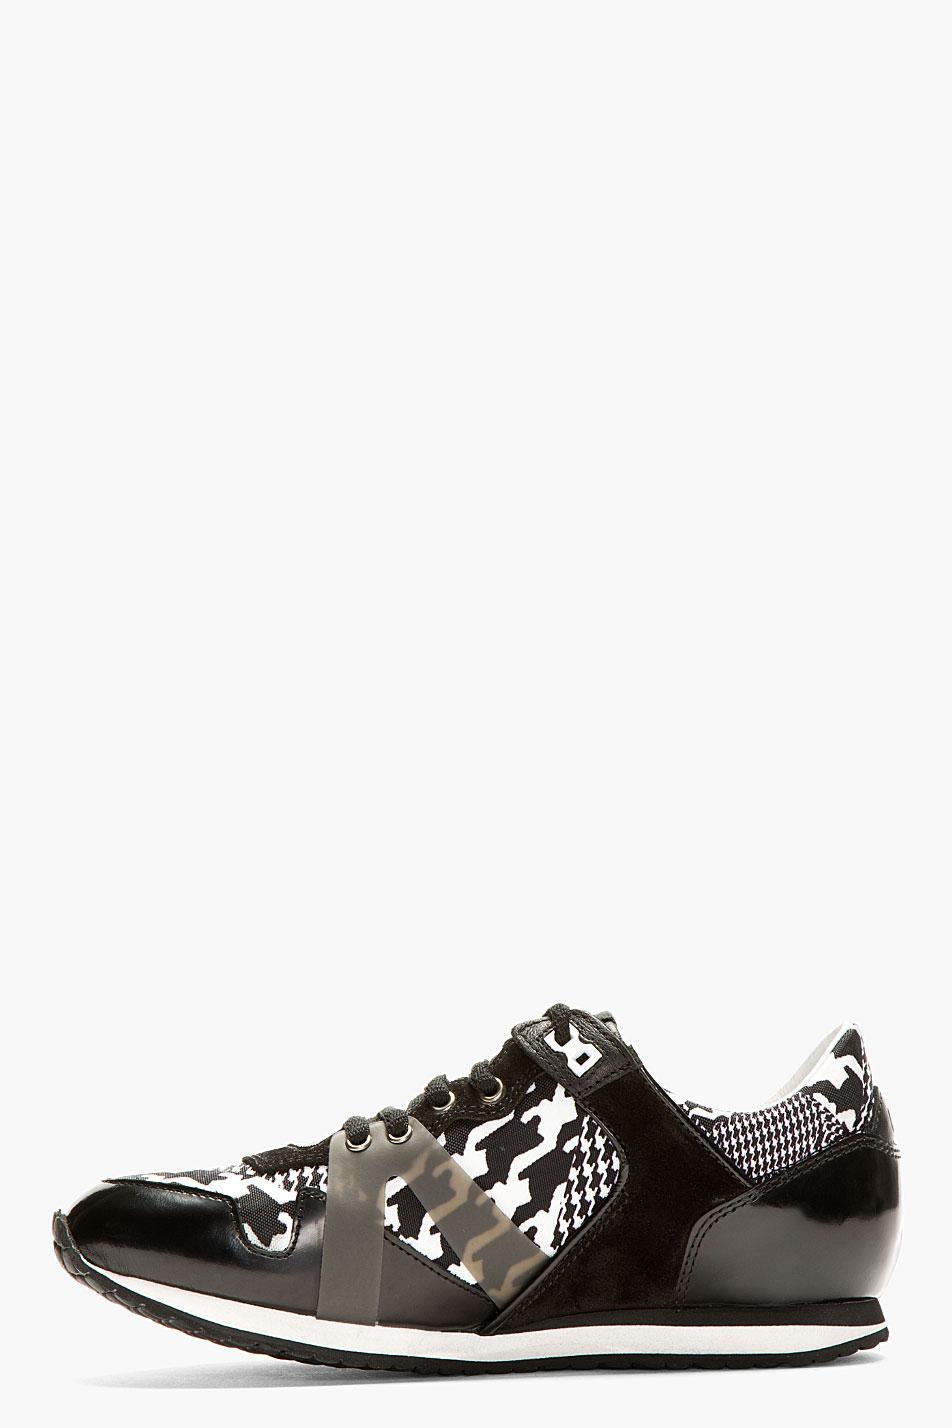 Mcq By Alexander Mcqueen Black Patent Leather and Textile Sneakers in ...